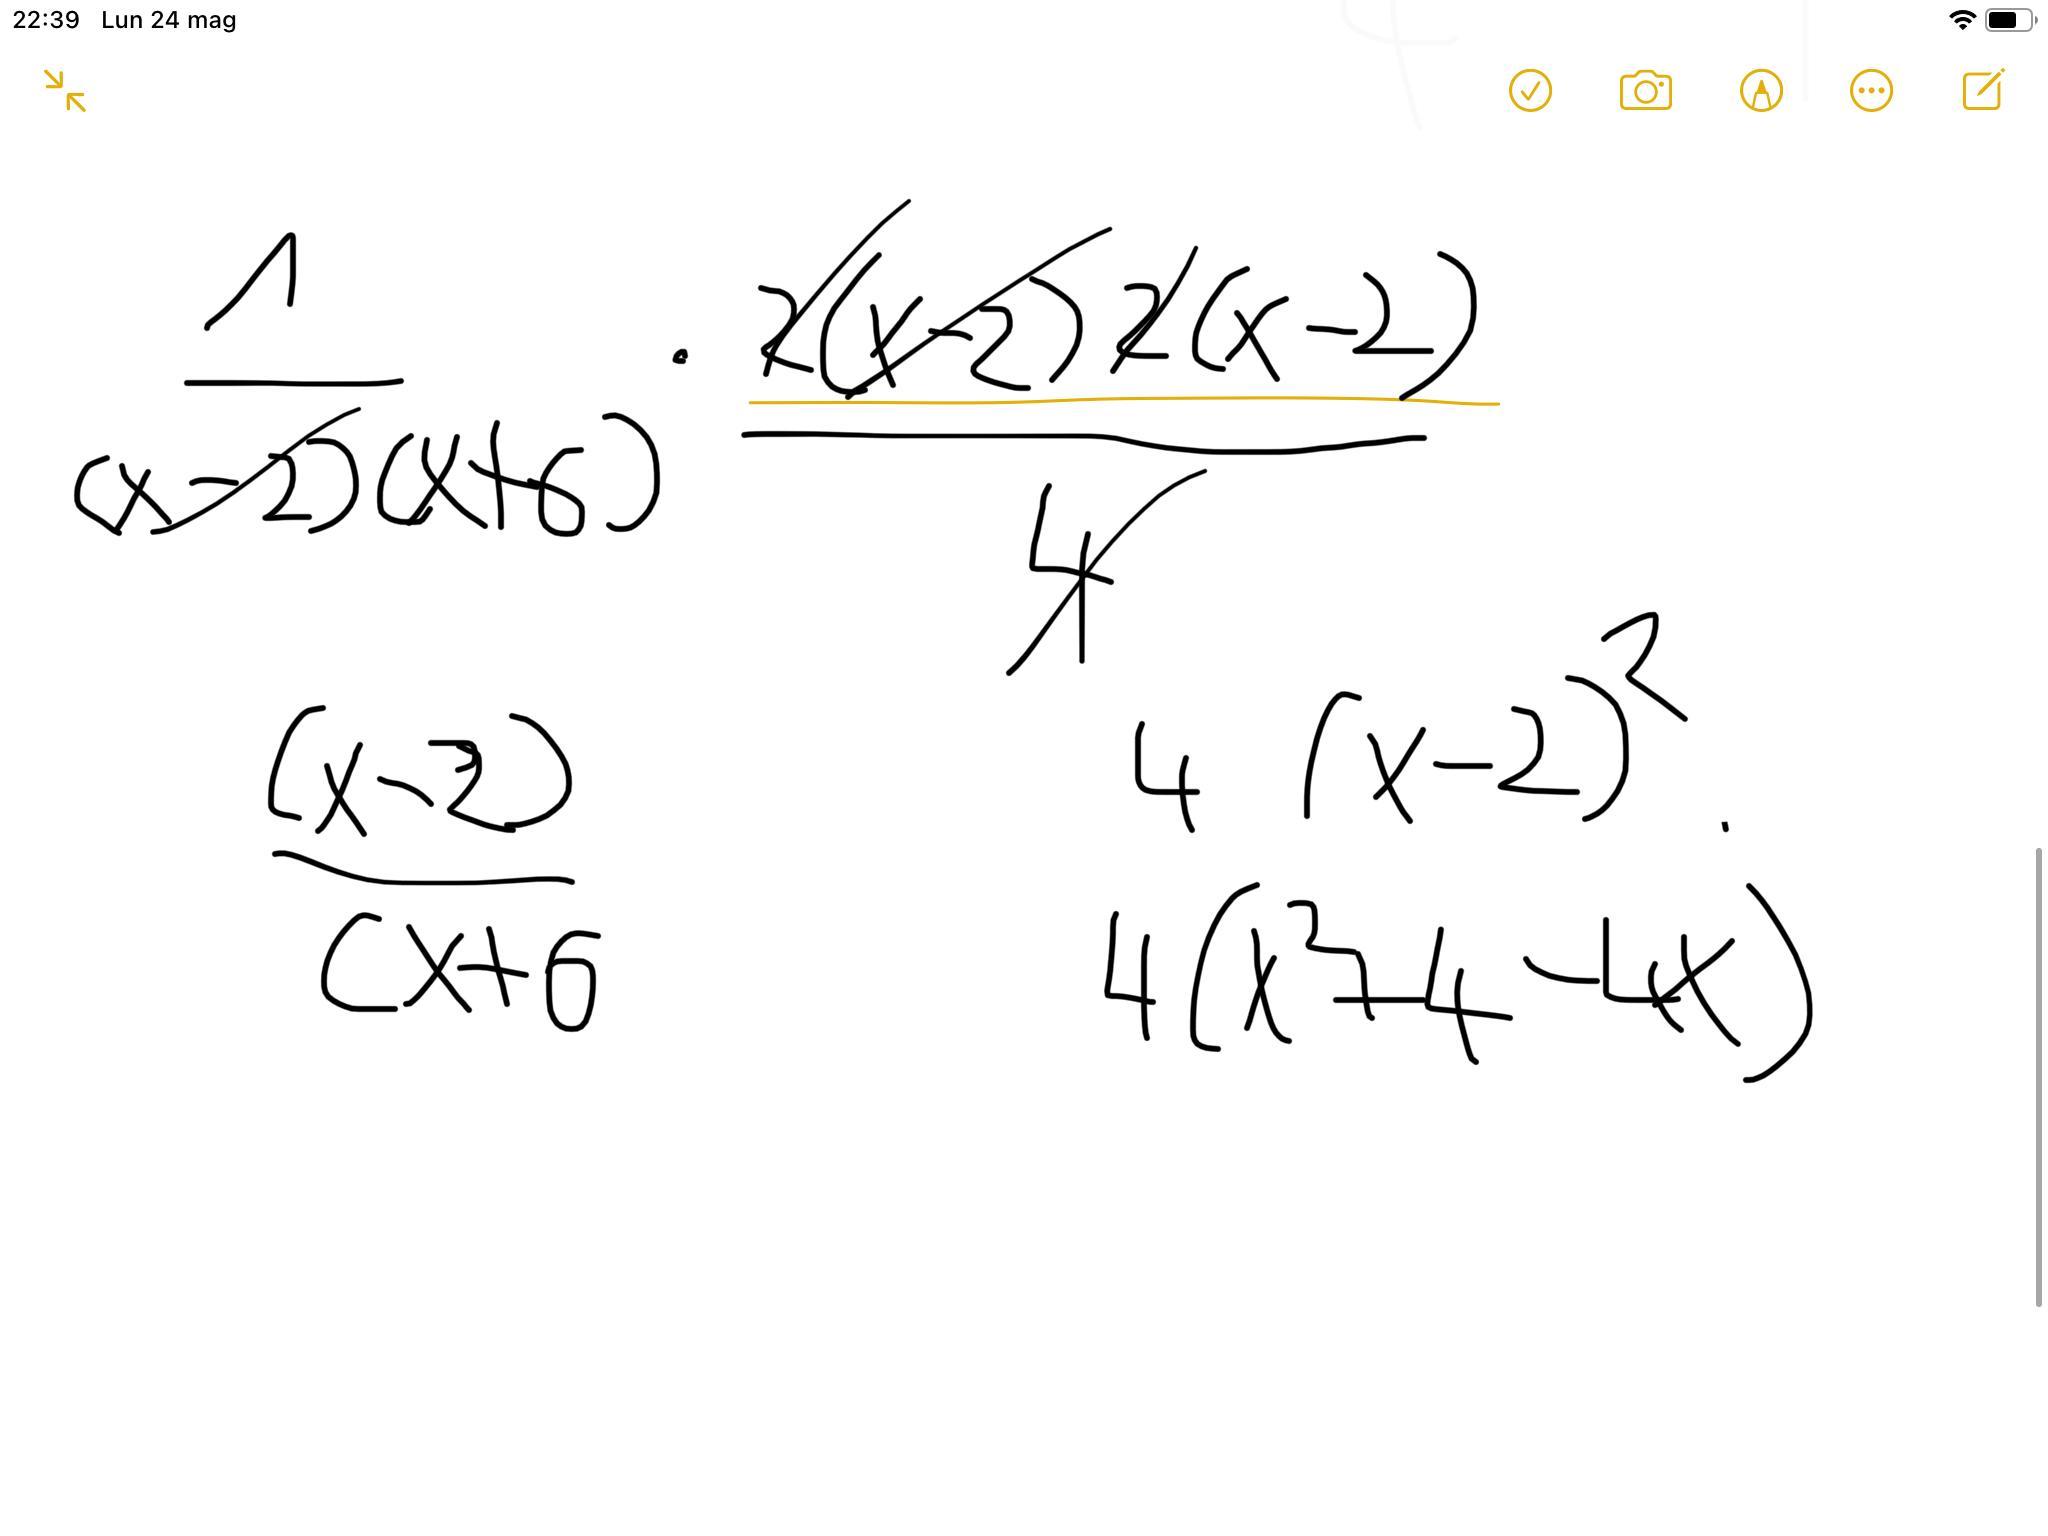 Select The Correct Answer. Consider Functions Fandg F(3) = 5.2.1, For 3 + 2 And = + -6 4:2 16: + 16 96)